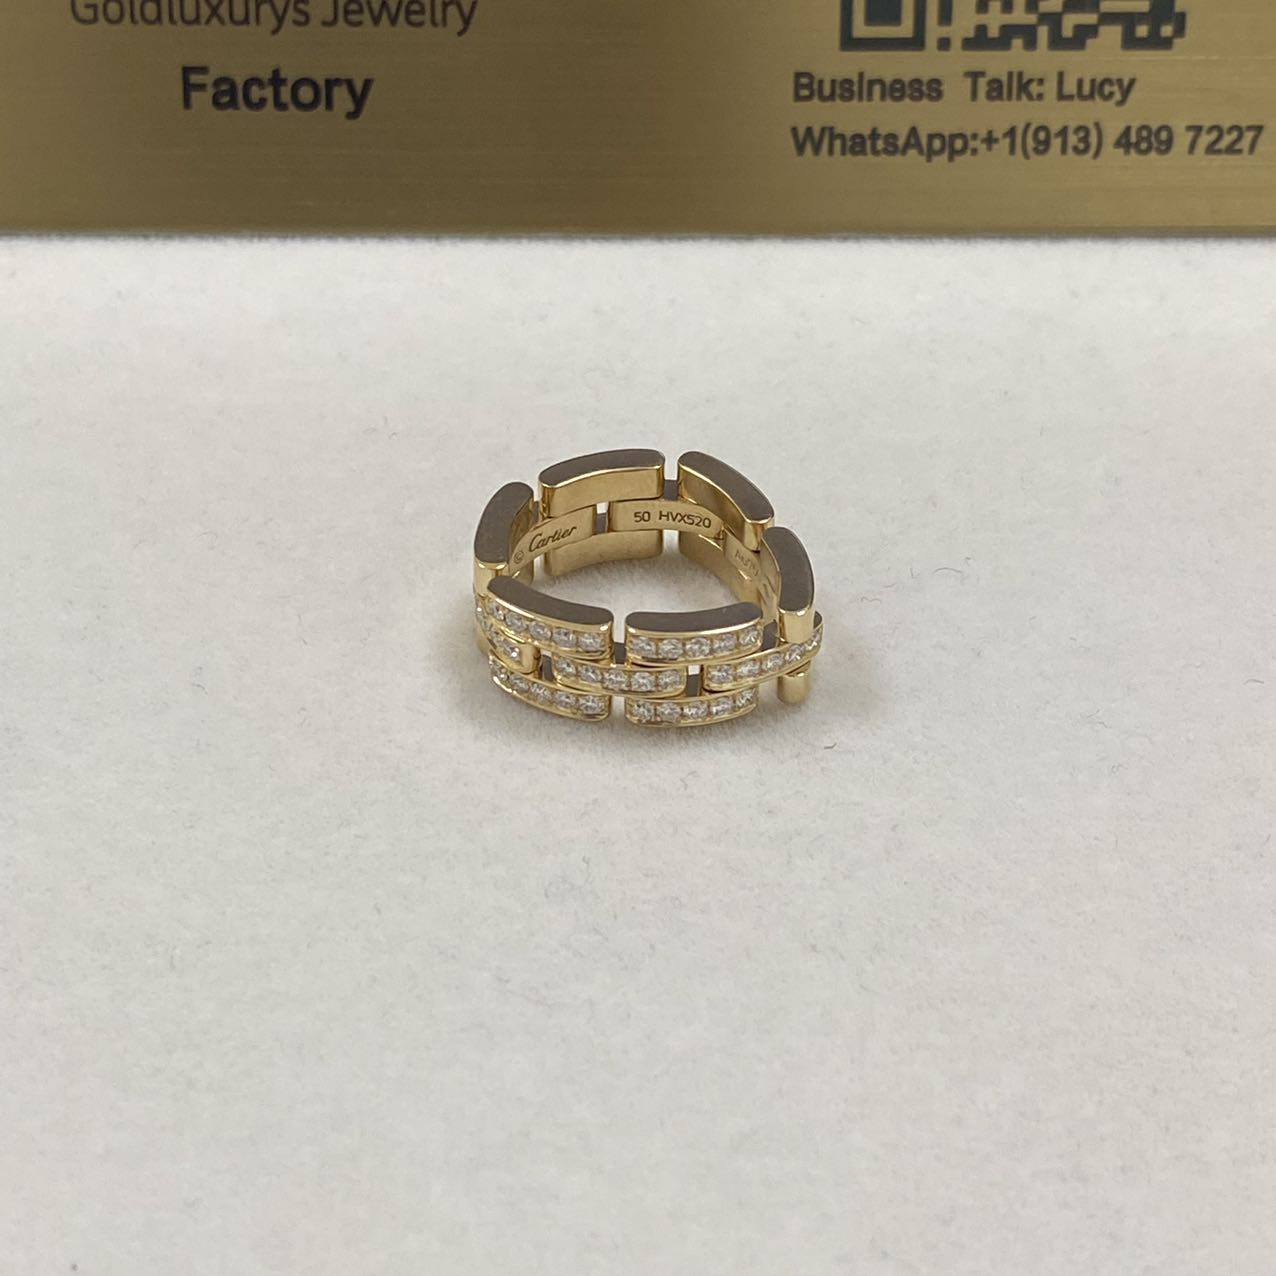 Cartier Maillon Panthere Ring 18K Yellow Gold 3 Half Diamond Paved Rows B4127100